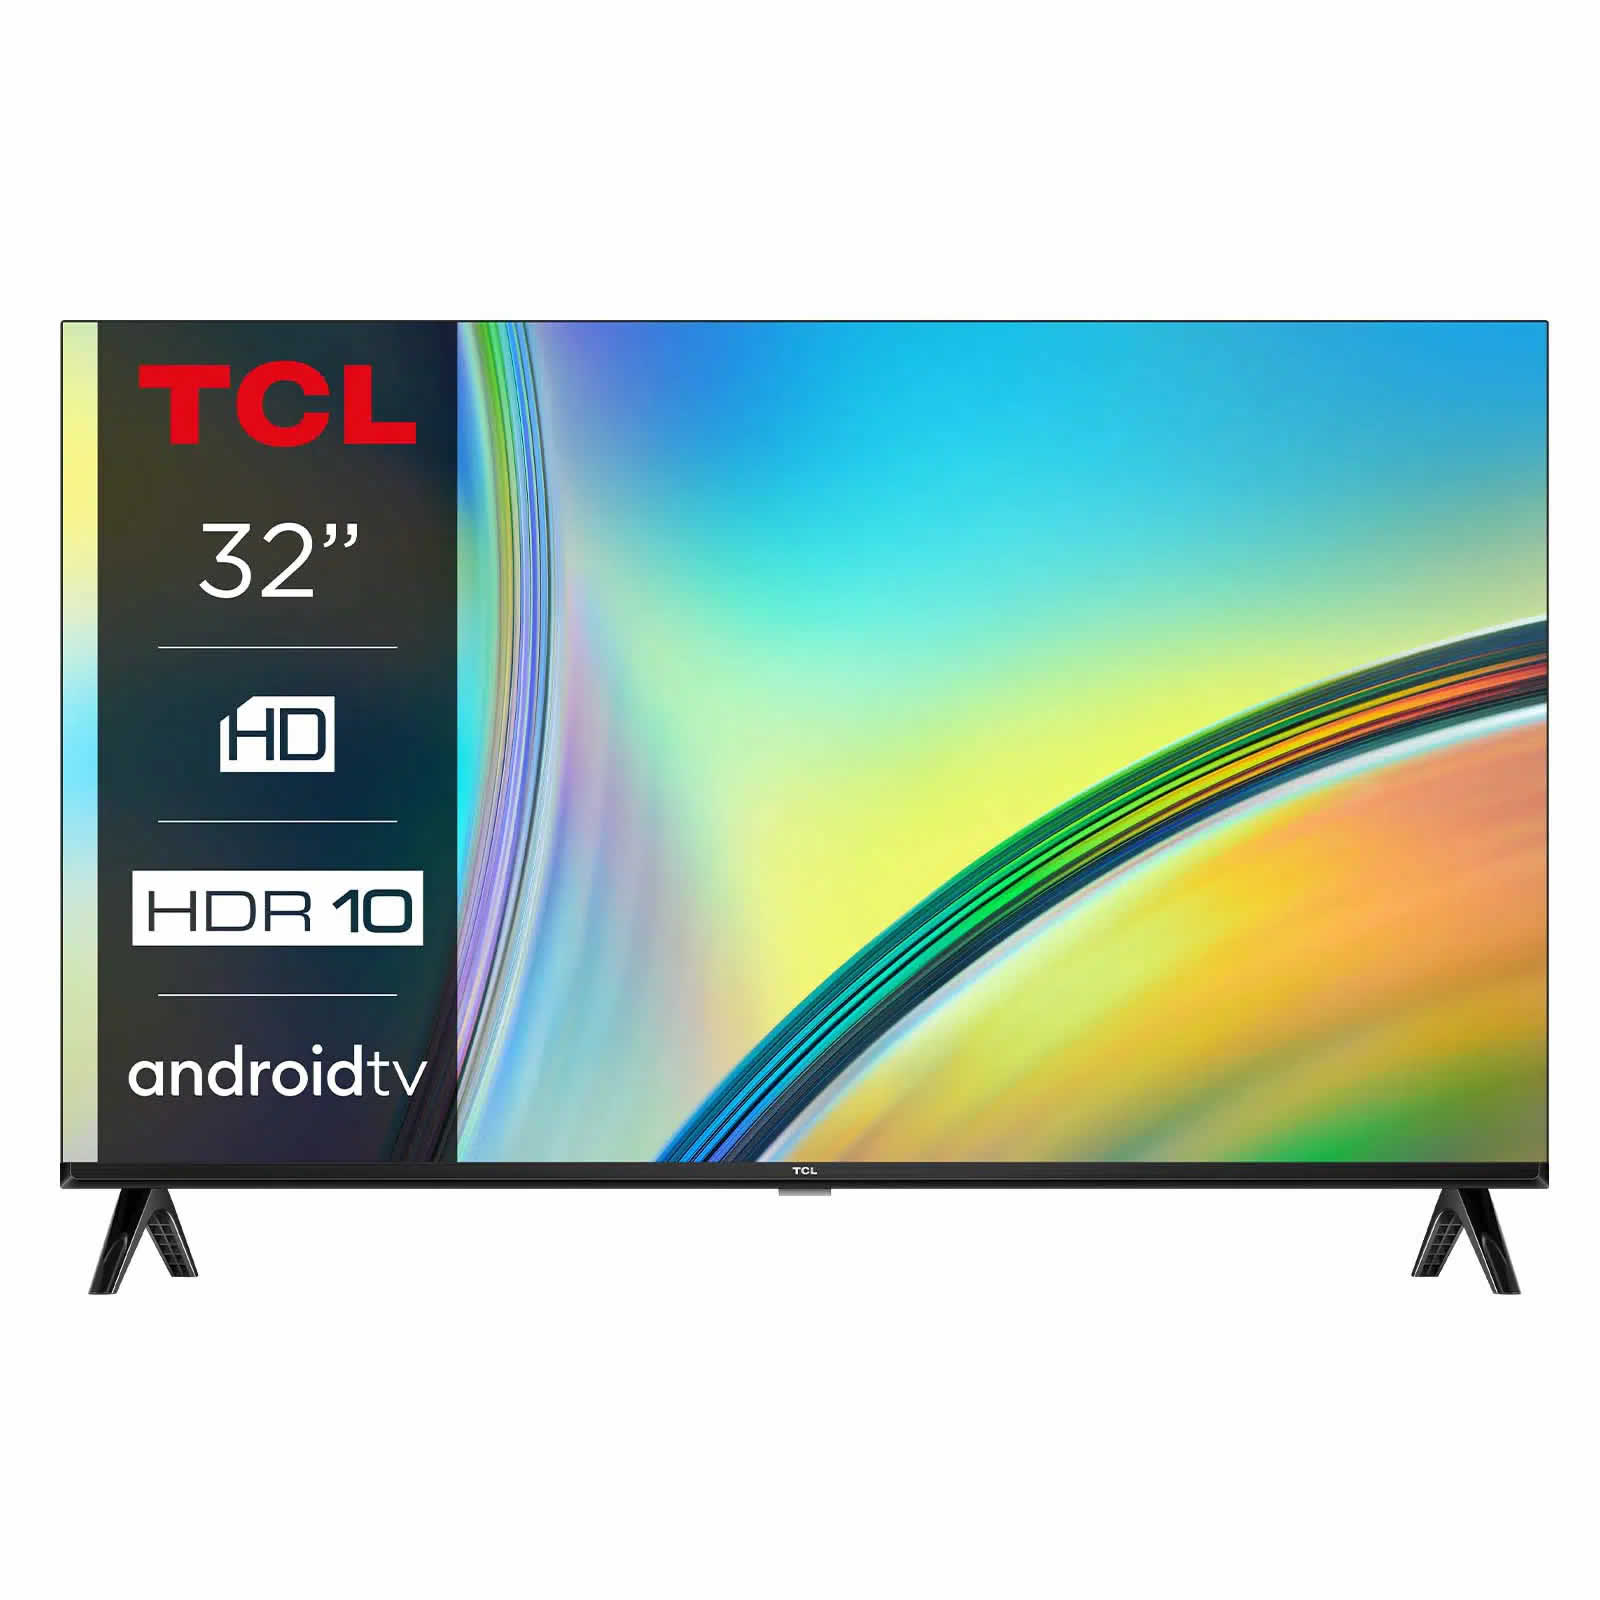 TCL 32inch HD LED SMART TV Android